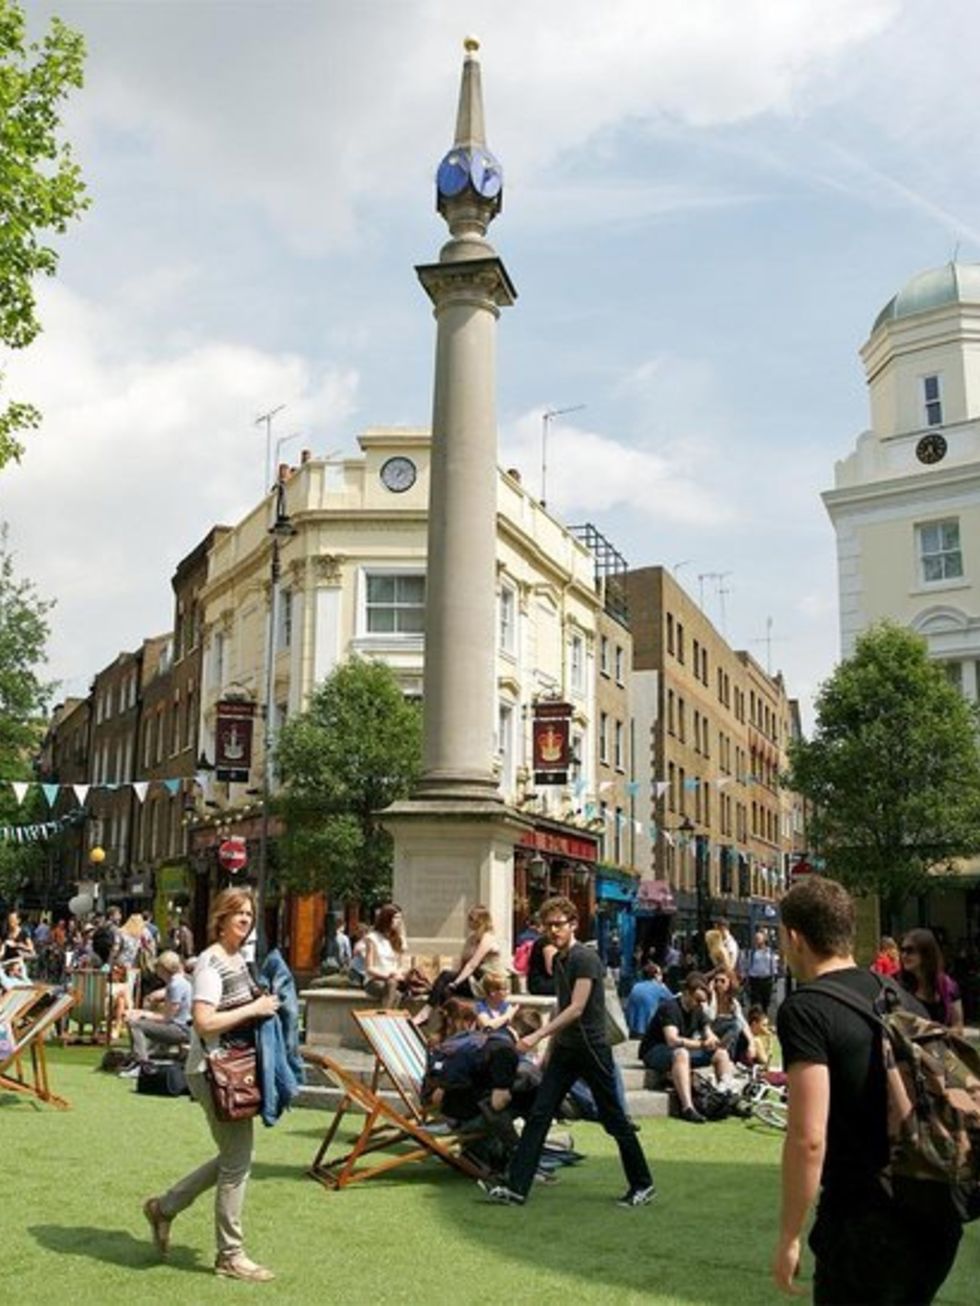 SHOPPING: Seven Dials Spotlight

This Saturday there will be a free open-air culture festival right in the heart of London.

There will be live entertainment hosted by Rick Edwards, lawn and deck chairs to recline on, and in-store and outdoor activities i